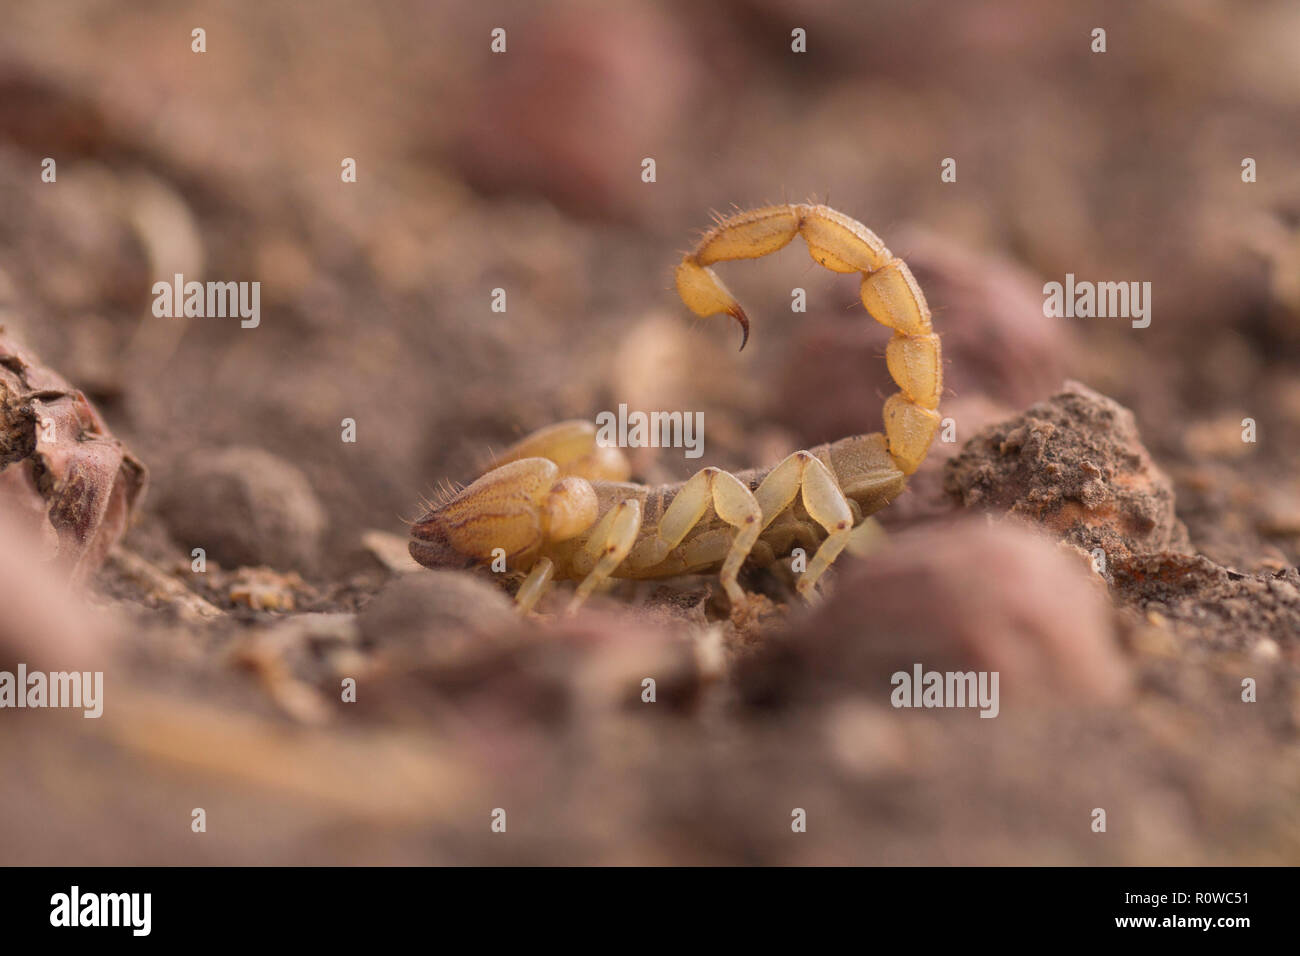 Israeli Gold Scorpion (Scorpio maurus palmatus). Scorpio maurus is a species of North African and Middle Eastern scorpion, also known as the large-cla Stock Photo